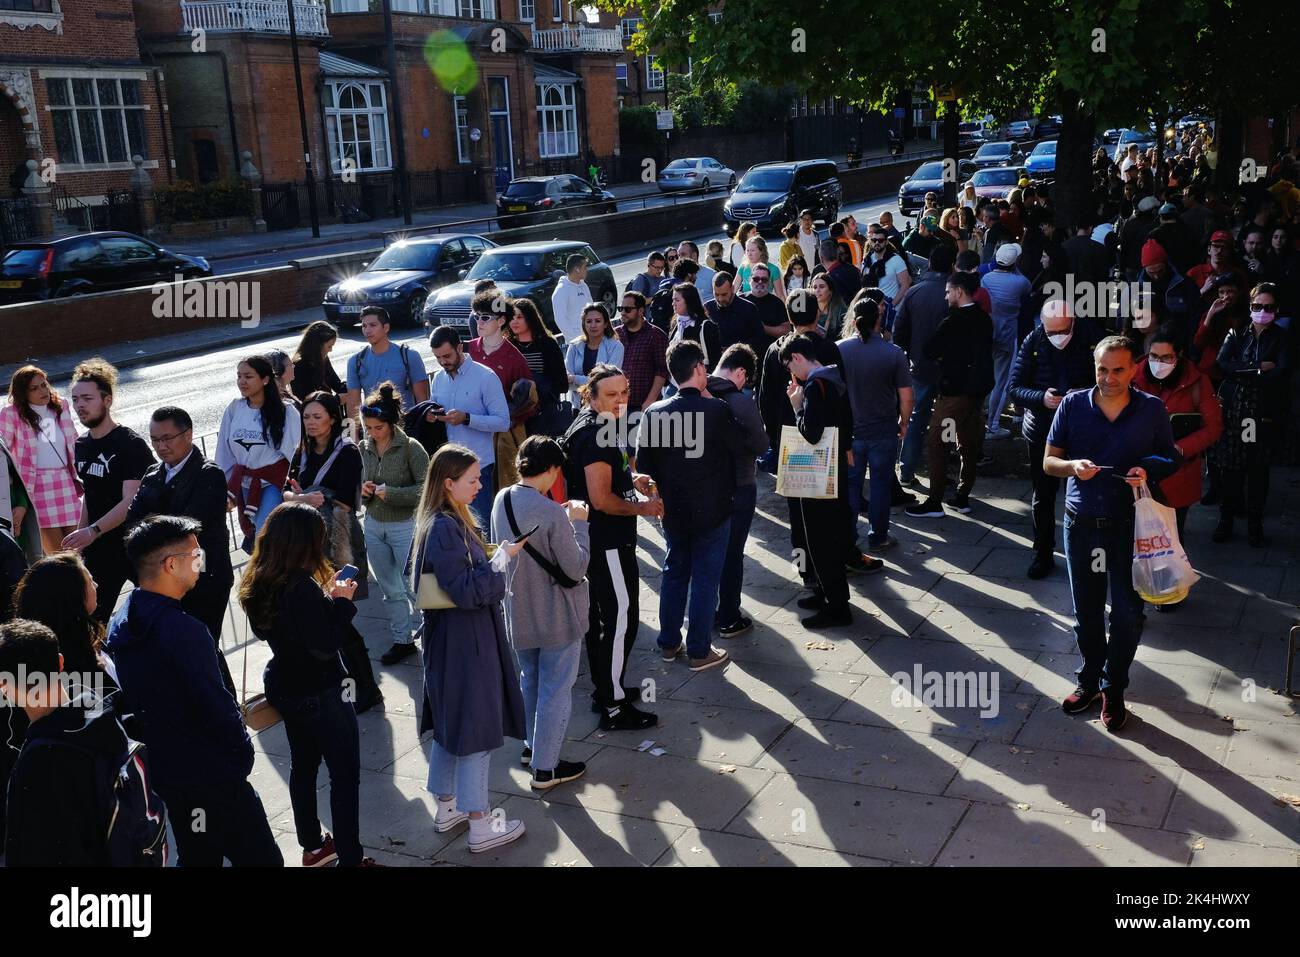 London, UK. 2nd October, 2022. Brazilian expats in the Capital took to the polls in the nation's presidential election. Supporters of the two main candidates - the Liberal Party's incumbent Jair Bolsonaro and Luiz Inacio Lula de Silva of the Workers' Party, gathered outside Hammersmith and Fulham College in west London as long voting queues developed throughout the day. There are approximately 15,000 registered expected to vote in London, out of 120 million in total worldwide. Credit: Eleventh Hour Photography/Alamy Live News Stock Photo